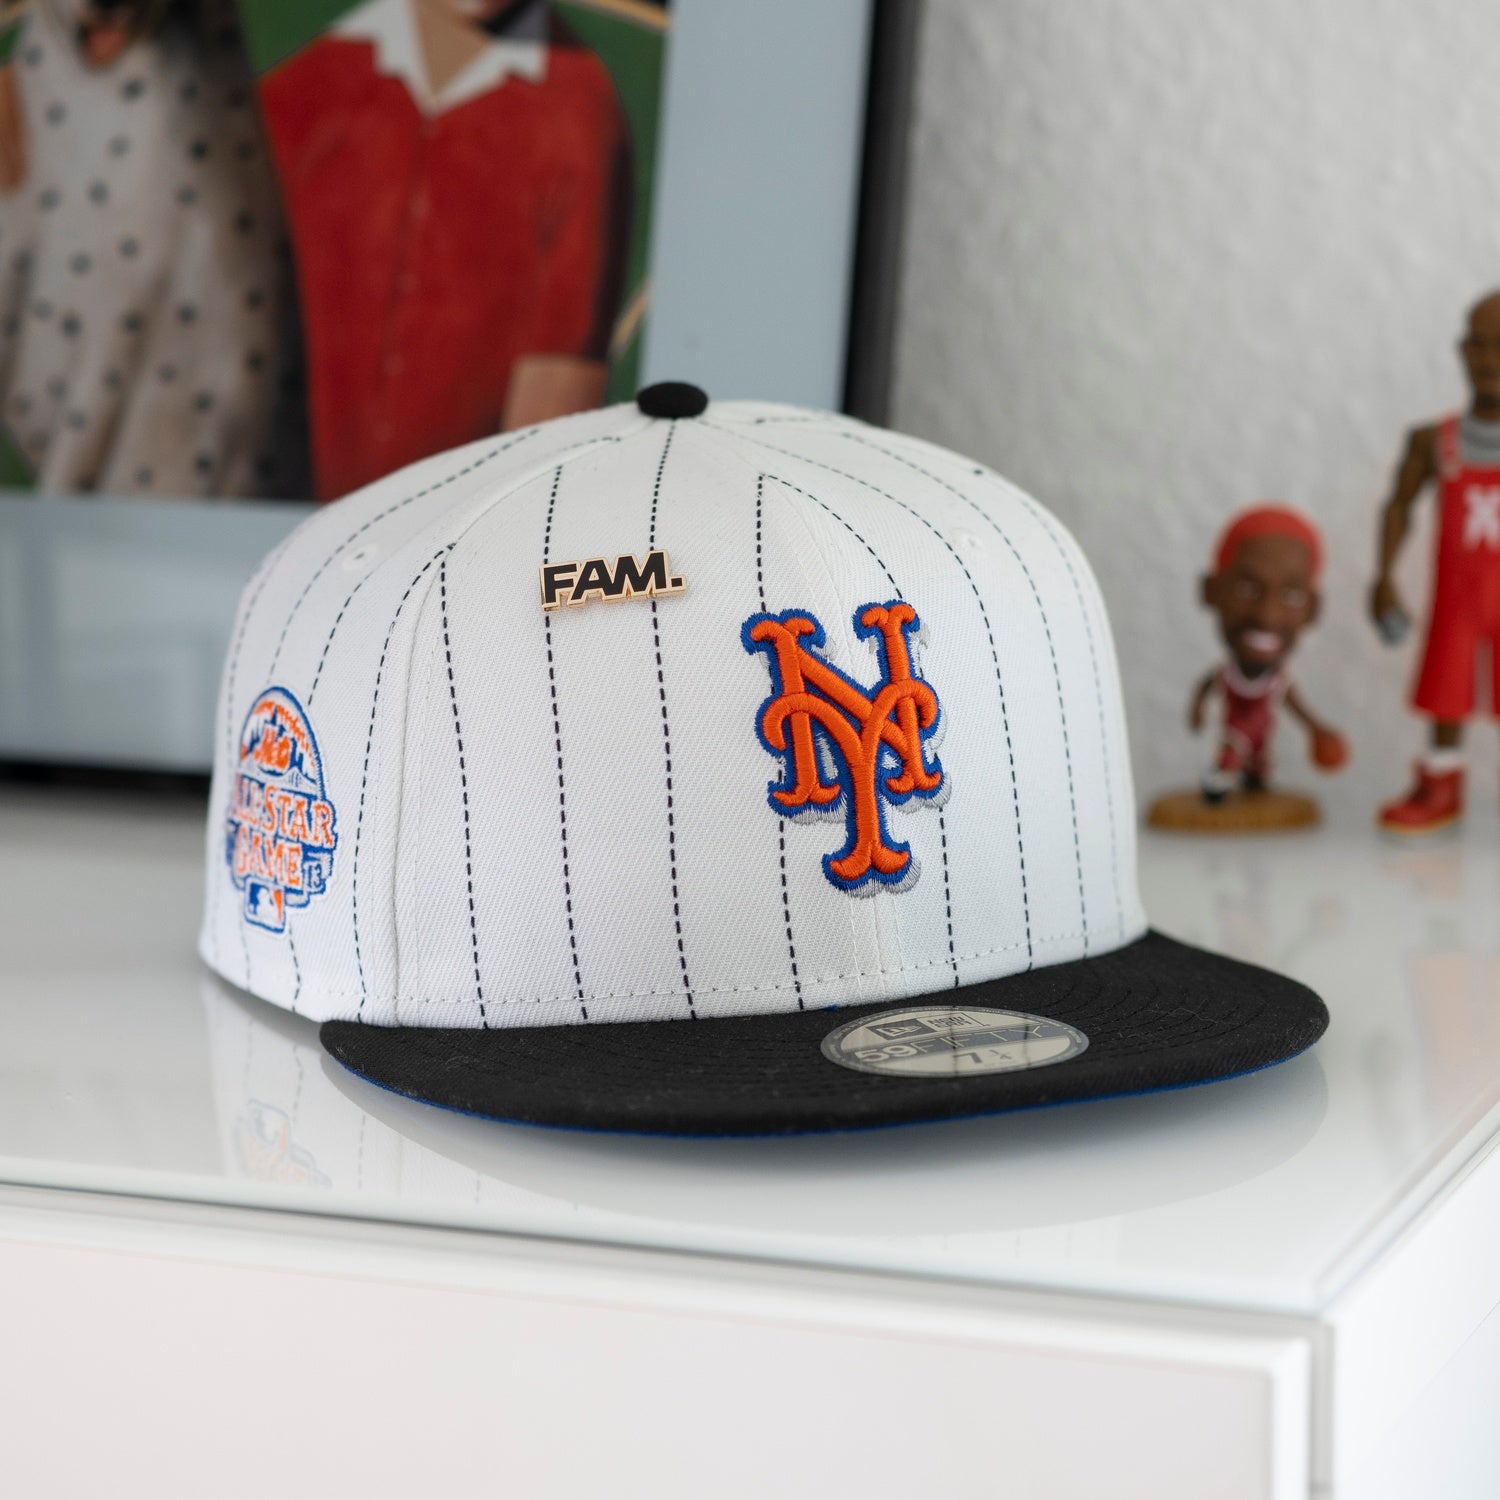 NEW ERA 59FIFTY MLB NEW YORK METS ALL STAR GAME 2013 STRIPED TWO TONE / BLUE UV FITTED CAP